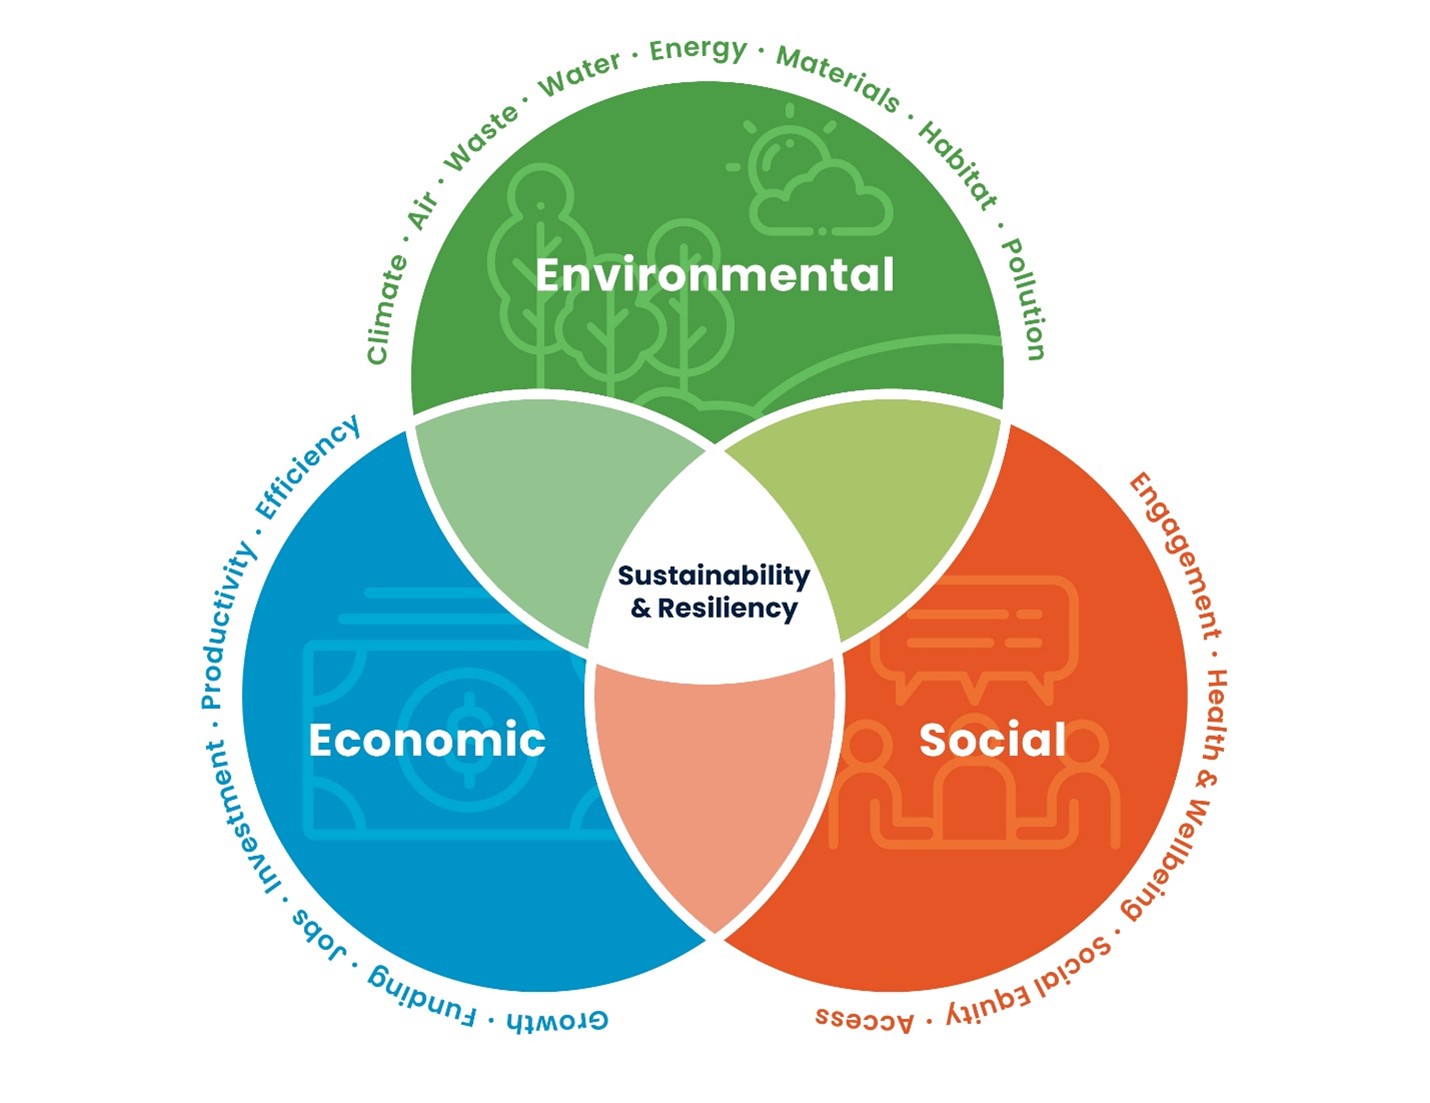 Sustainability and Resiliency depends on overlapping Environmental, Economic and Social elements